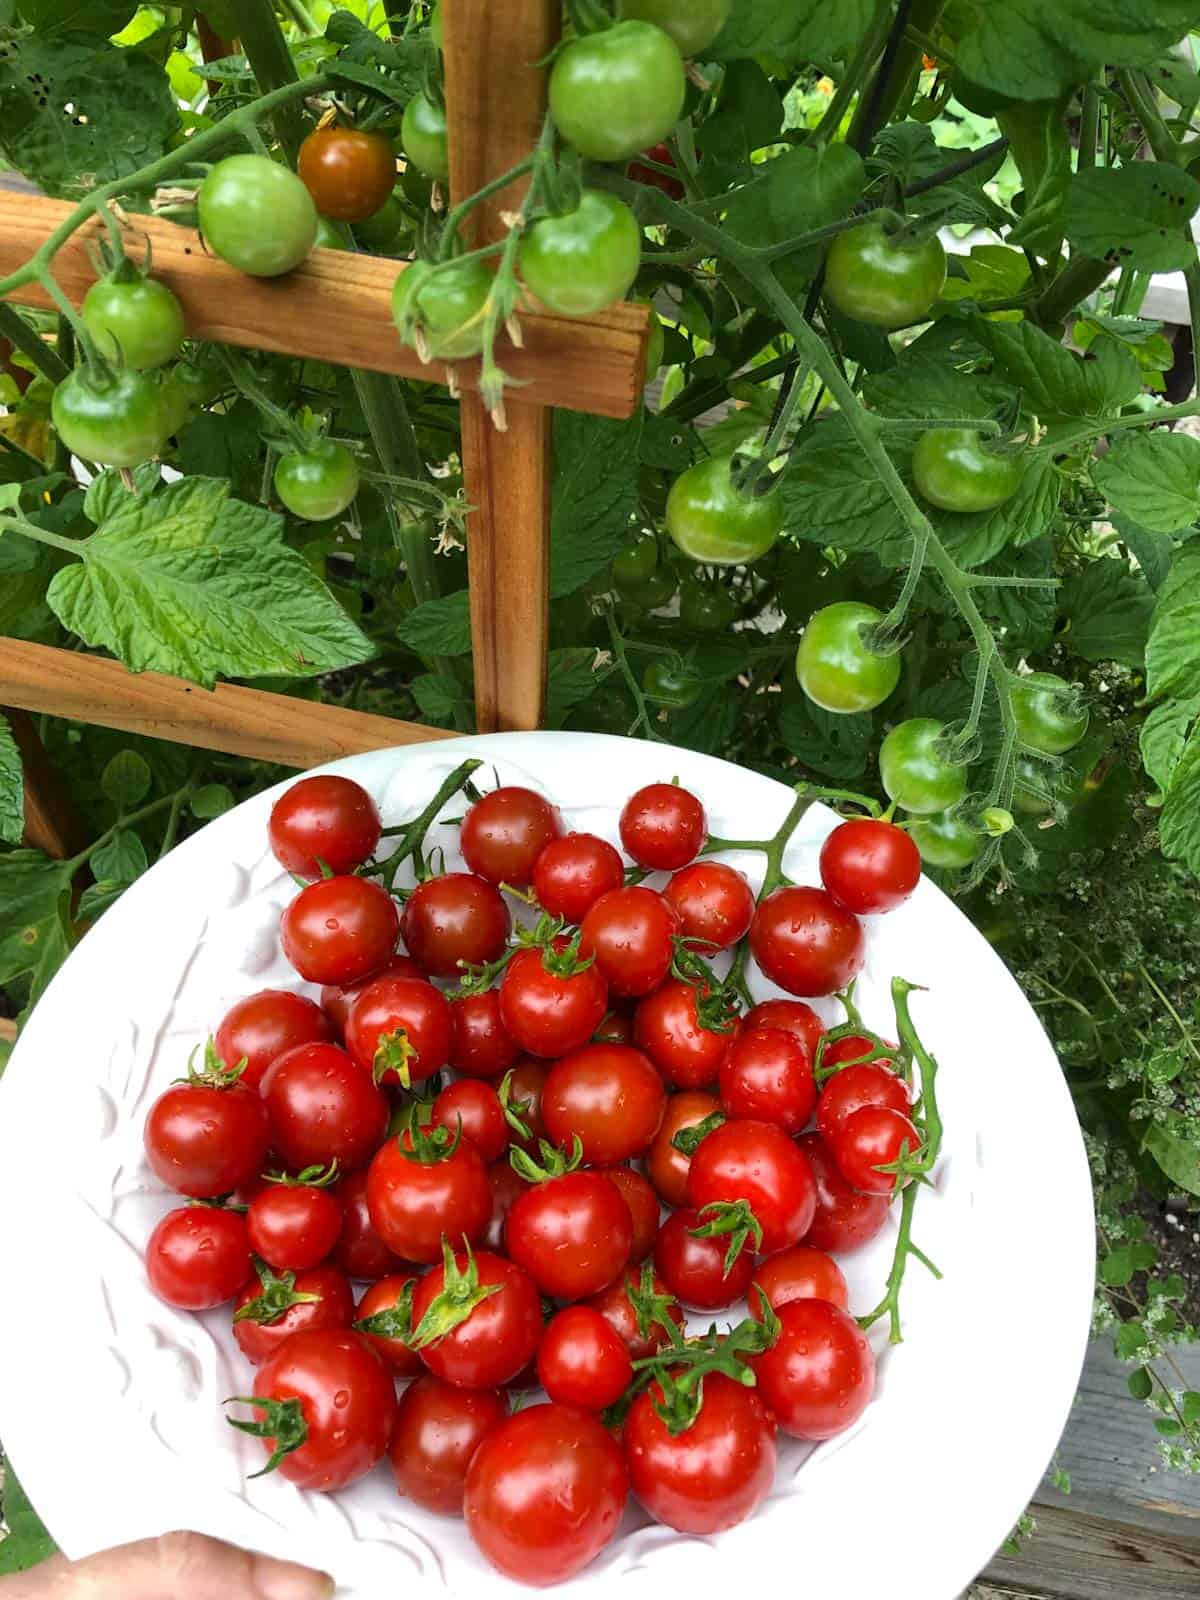 Fresh tomatoes picked from the garden.